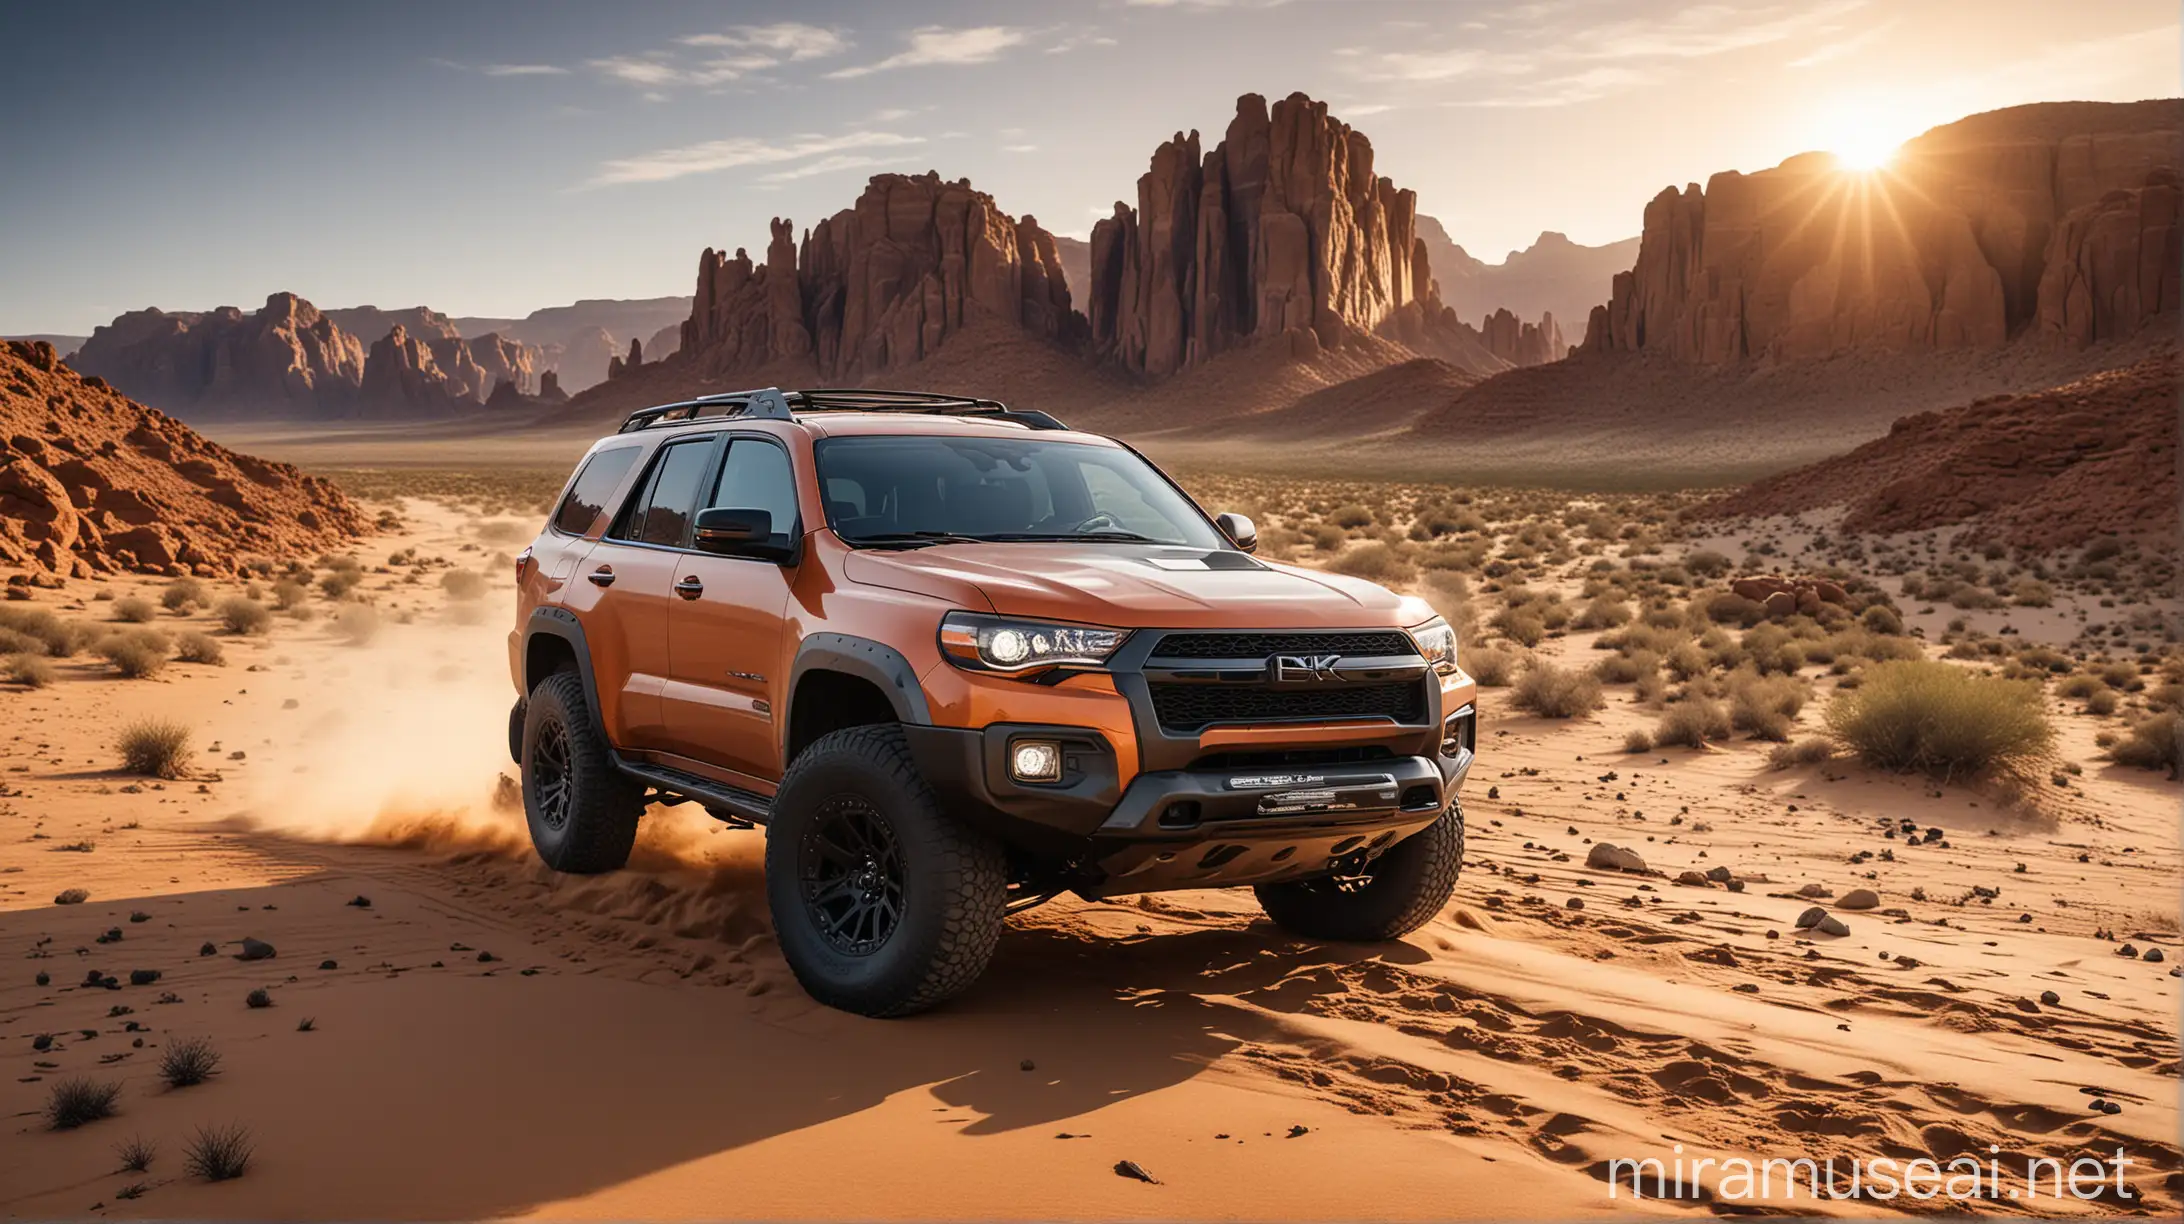 Bold SUV OffRoad Vehicle Conquering Desert Terrain at Sunrise